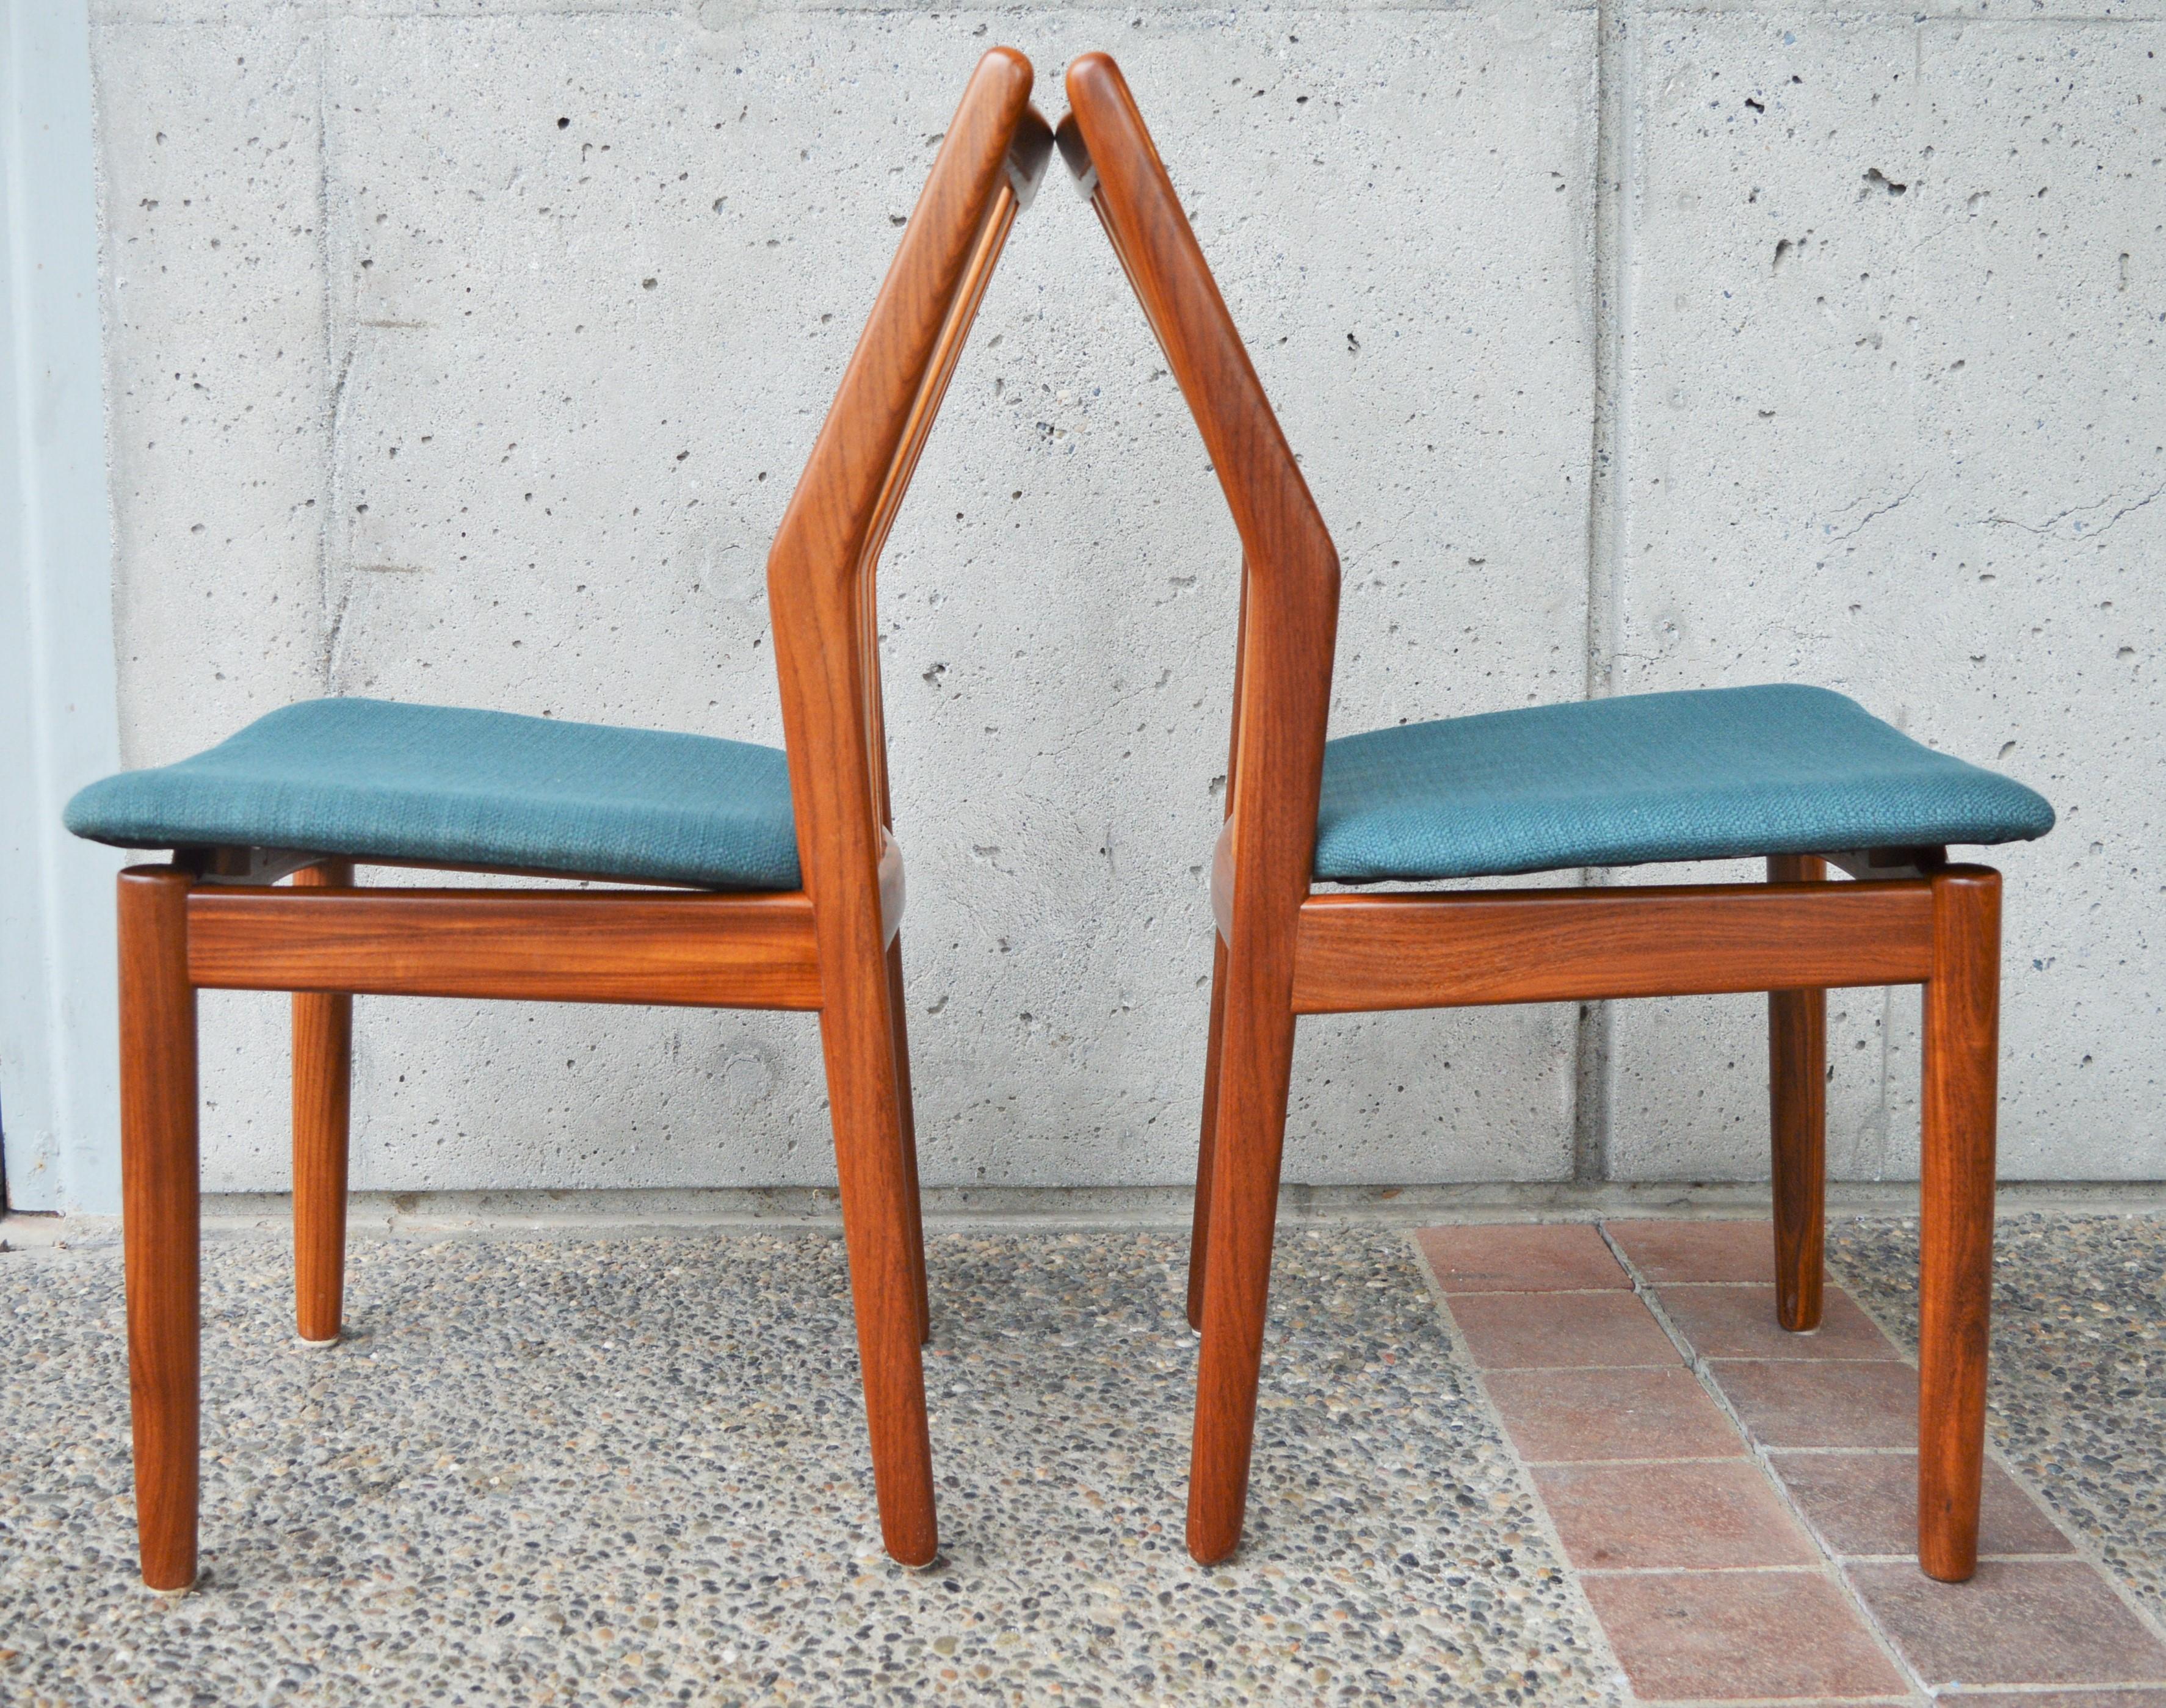 Upholstery Svend Madsen Set of 4 Danish Teak Dining Chairs with Bent Backs & New Teal Tweed For Sale